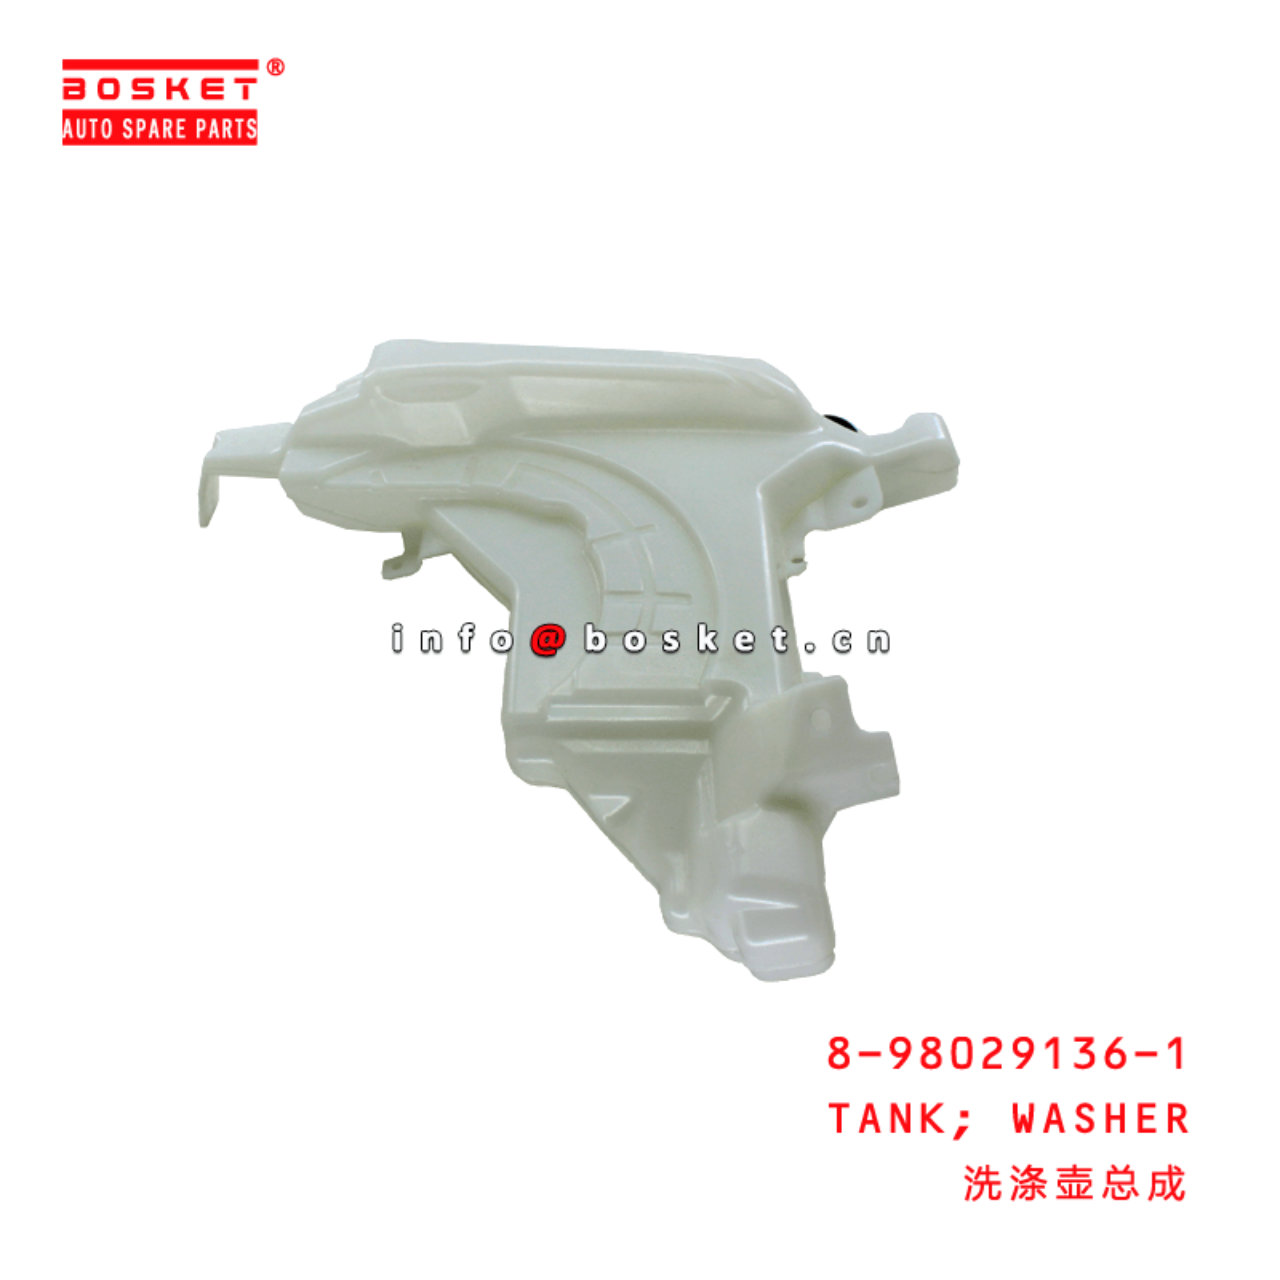  8-98029136-1 Washer Tank 8980291361 Suitable for ISUZU 700P